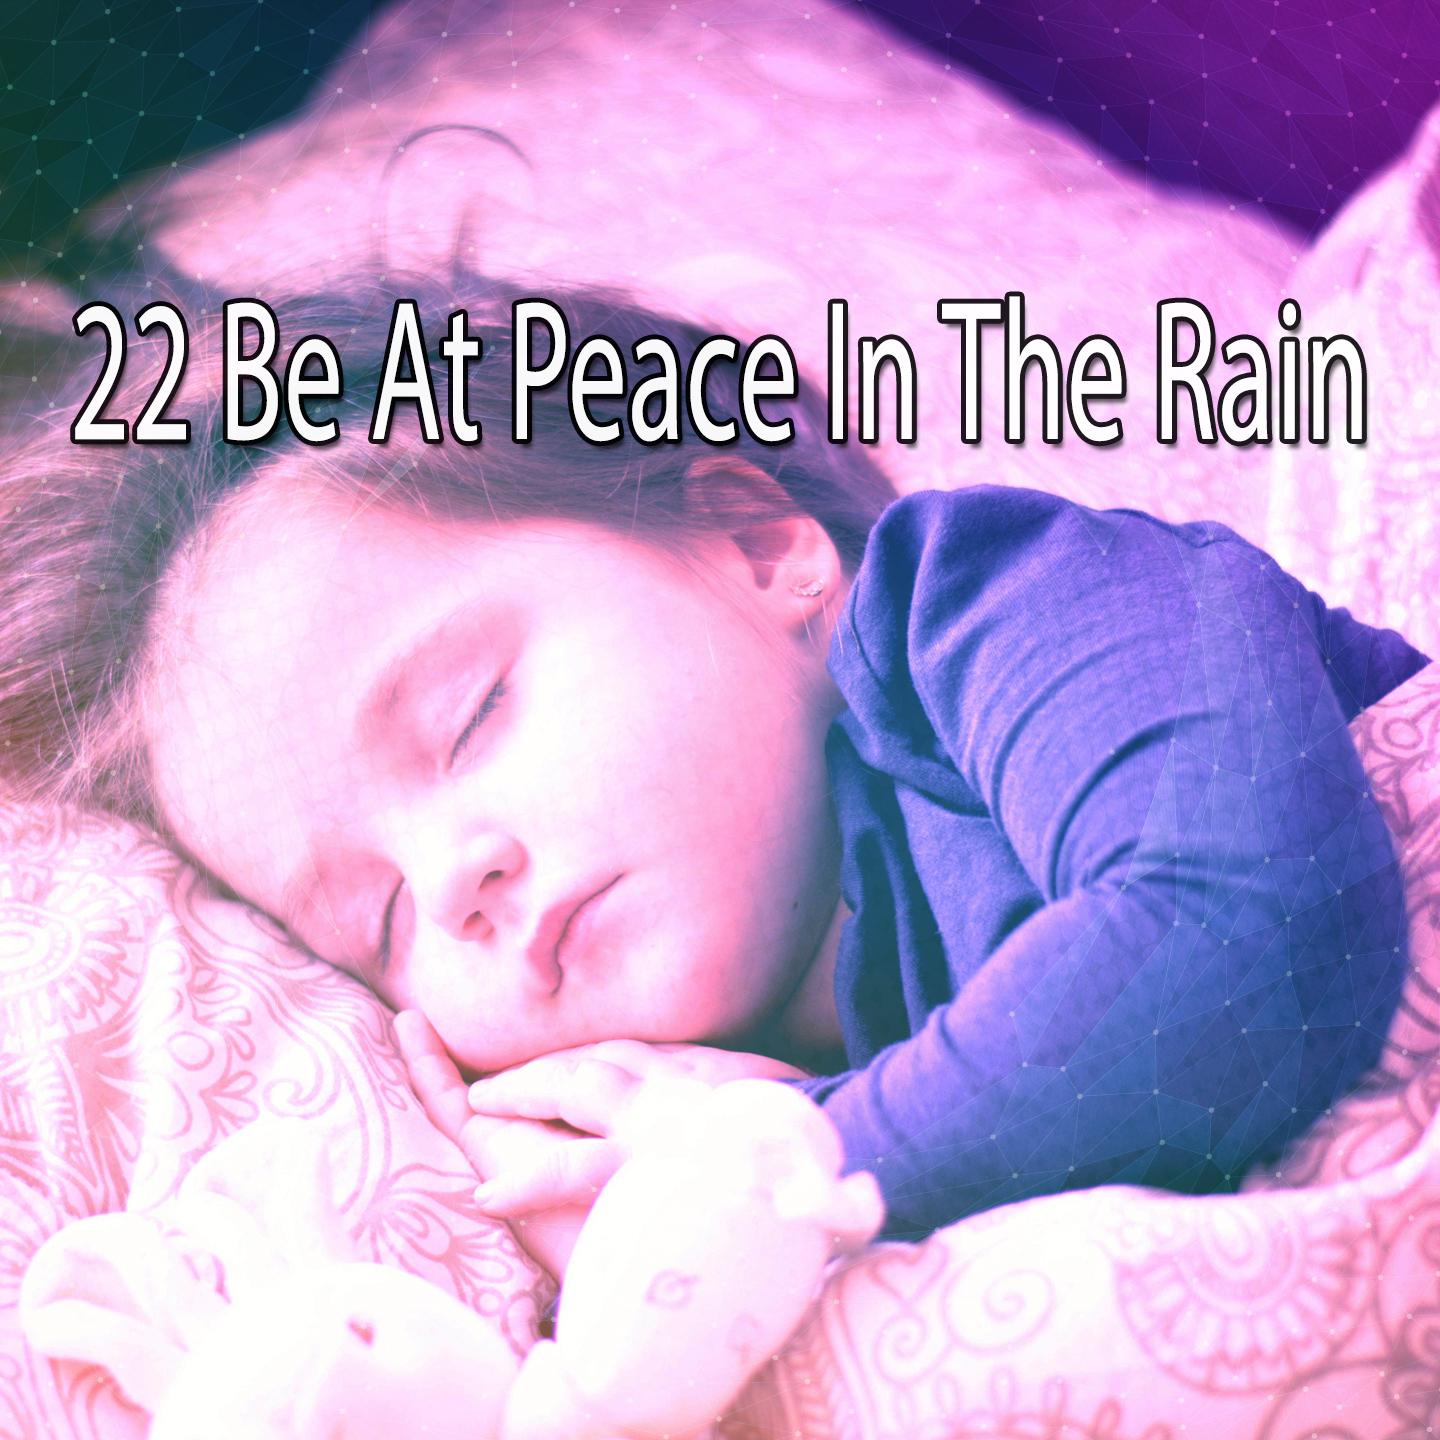 22 Be At Peace In The Rain